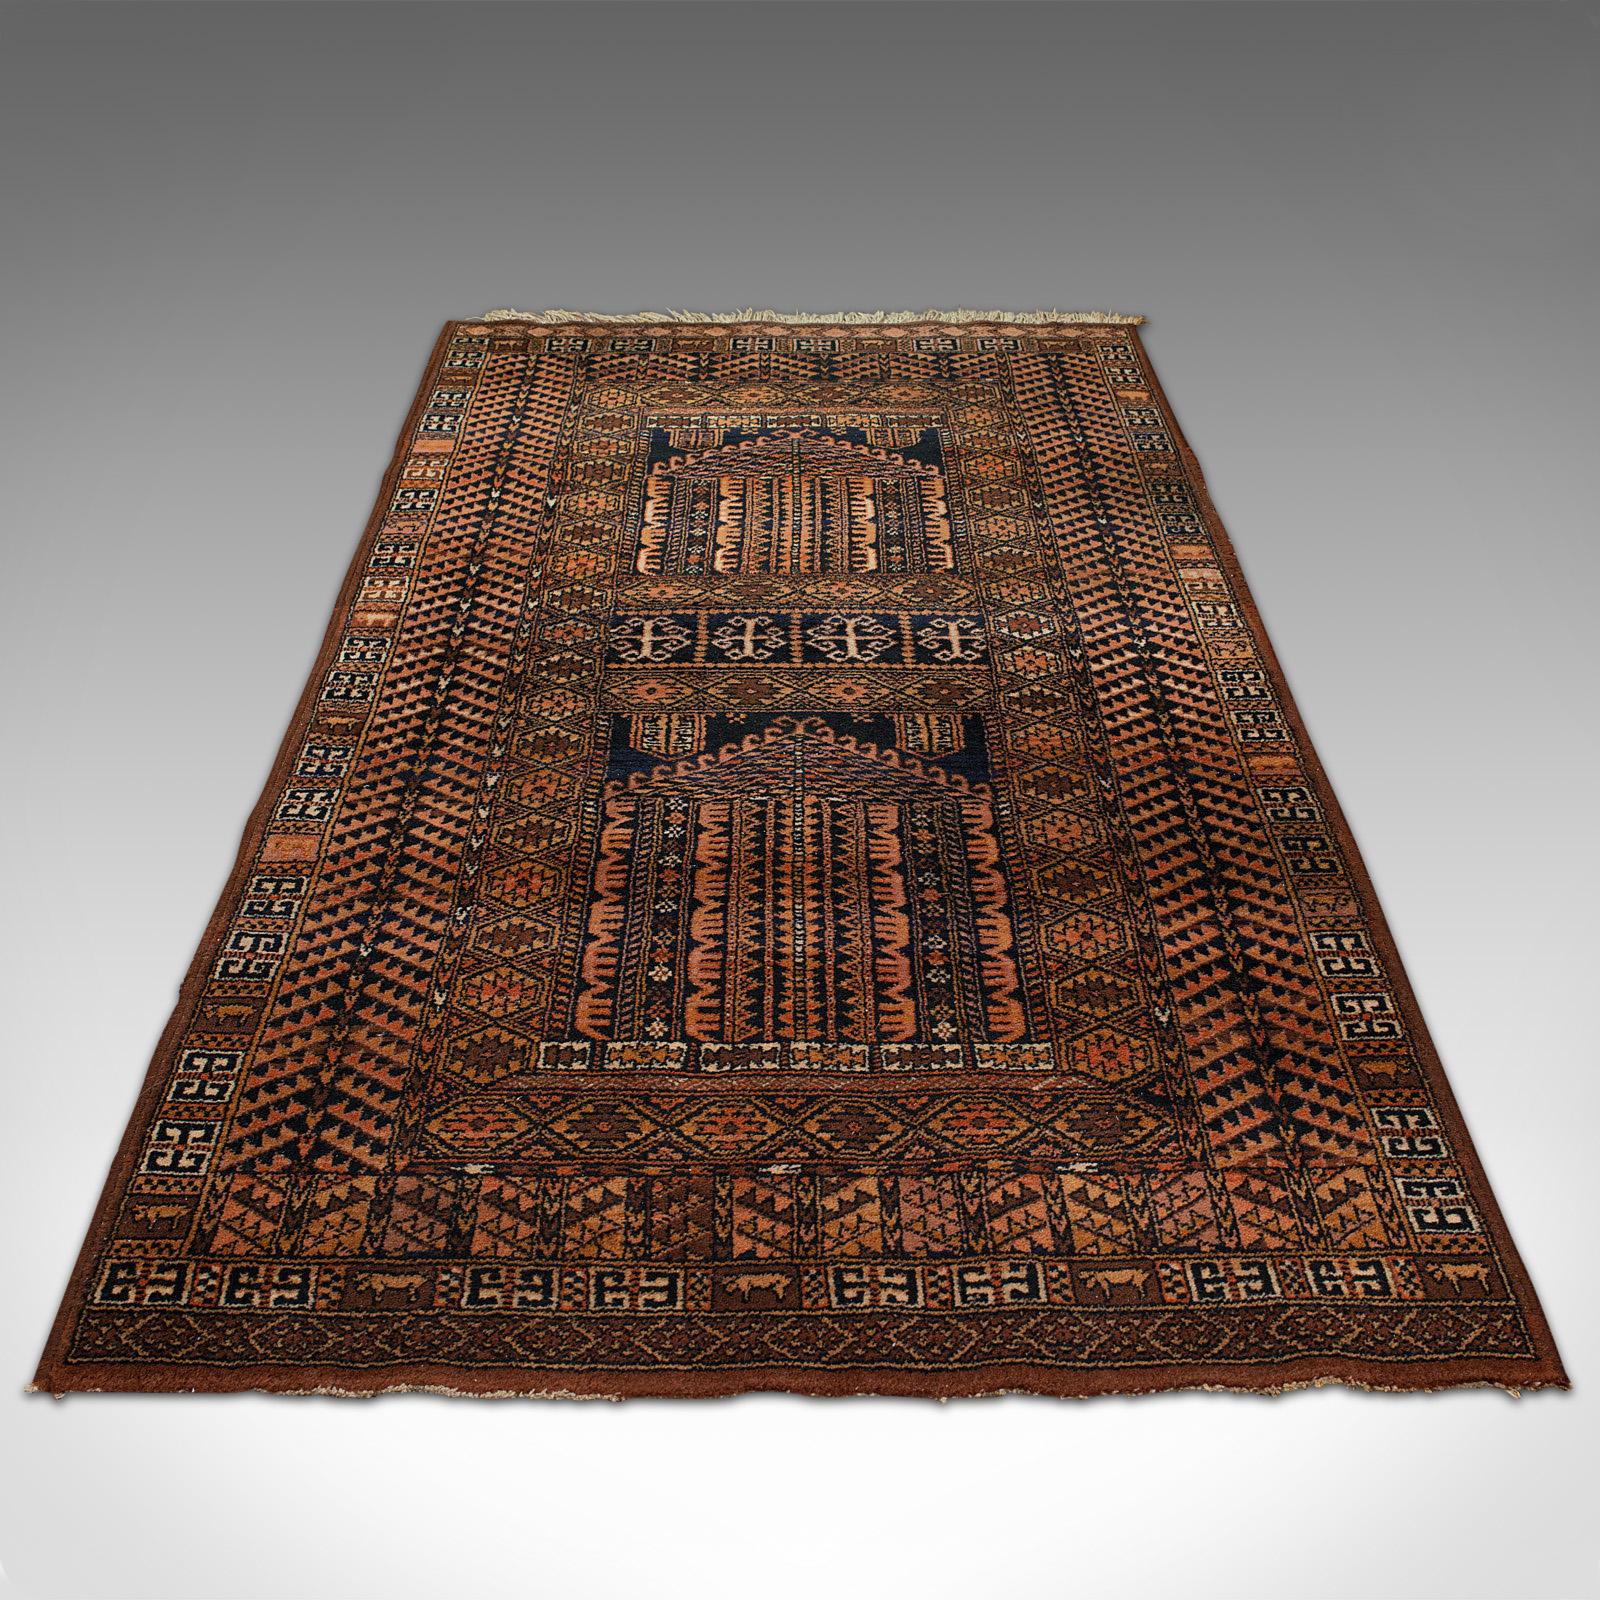 This is a large vintage decorative rug. A Belgian, quality woven lounge carpet in the manner of Ghiordes prayer mats, dating to the late 20th century, circa 1970.

Striking decorations and of near Dozar proportion at 91cm x 193cm (35.75